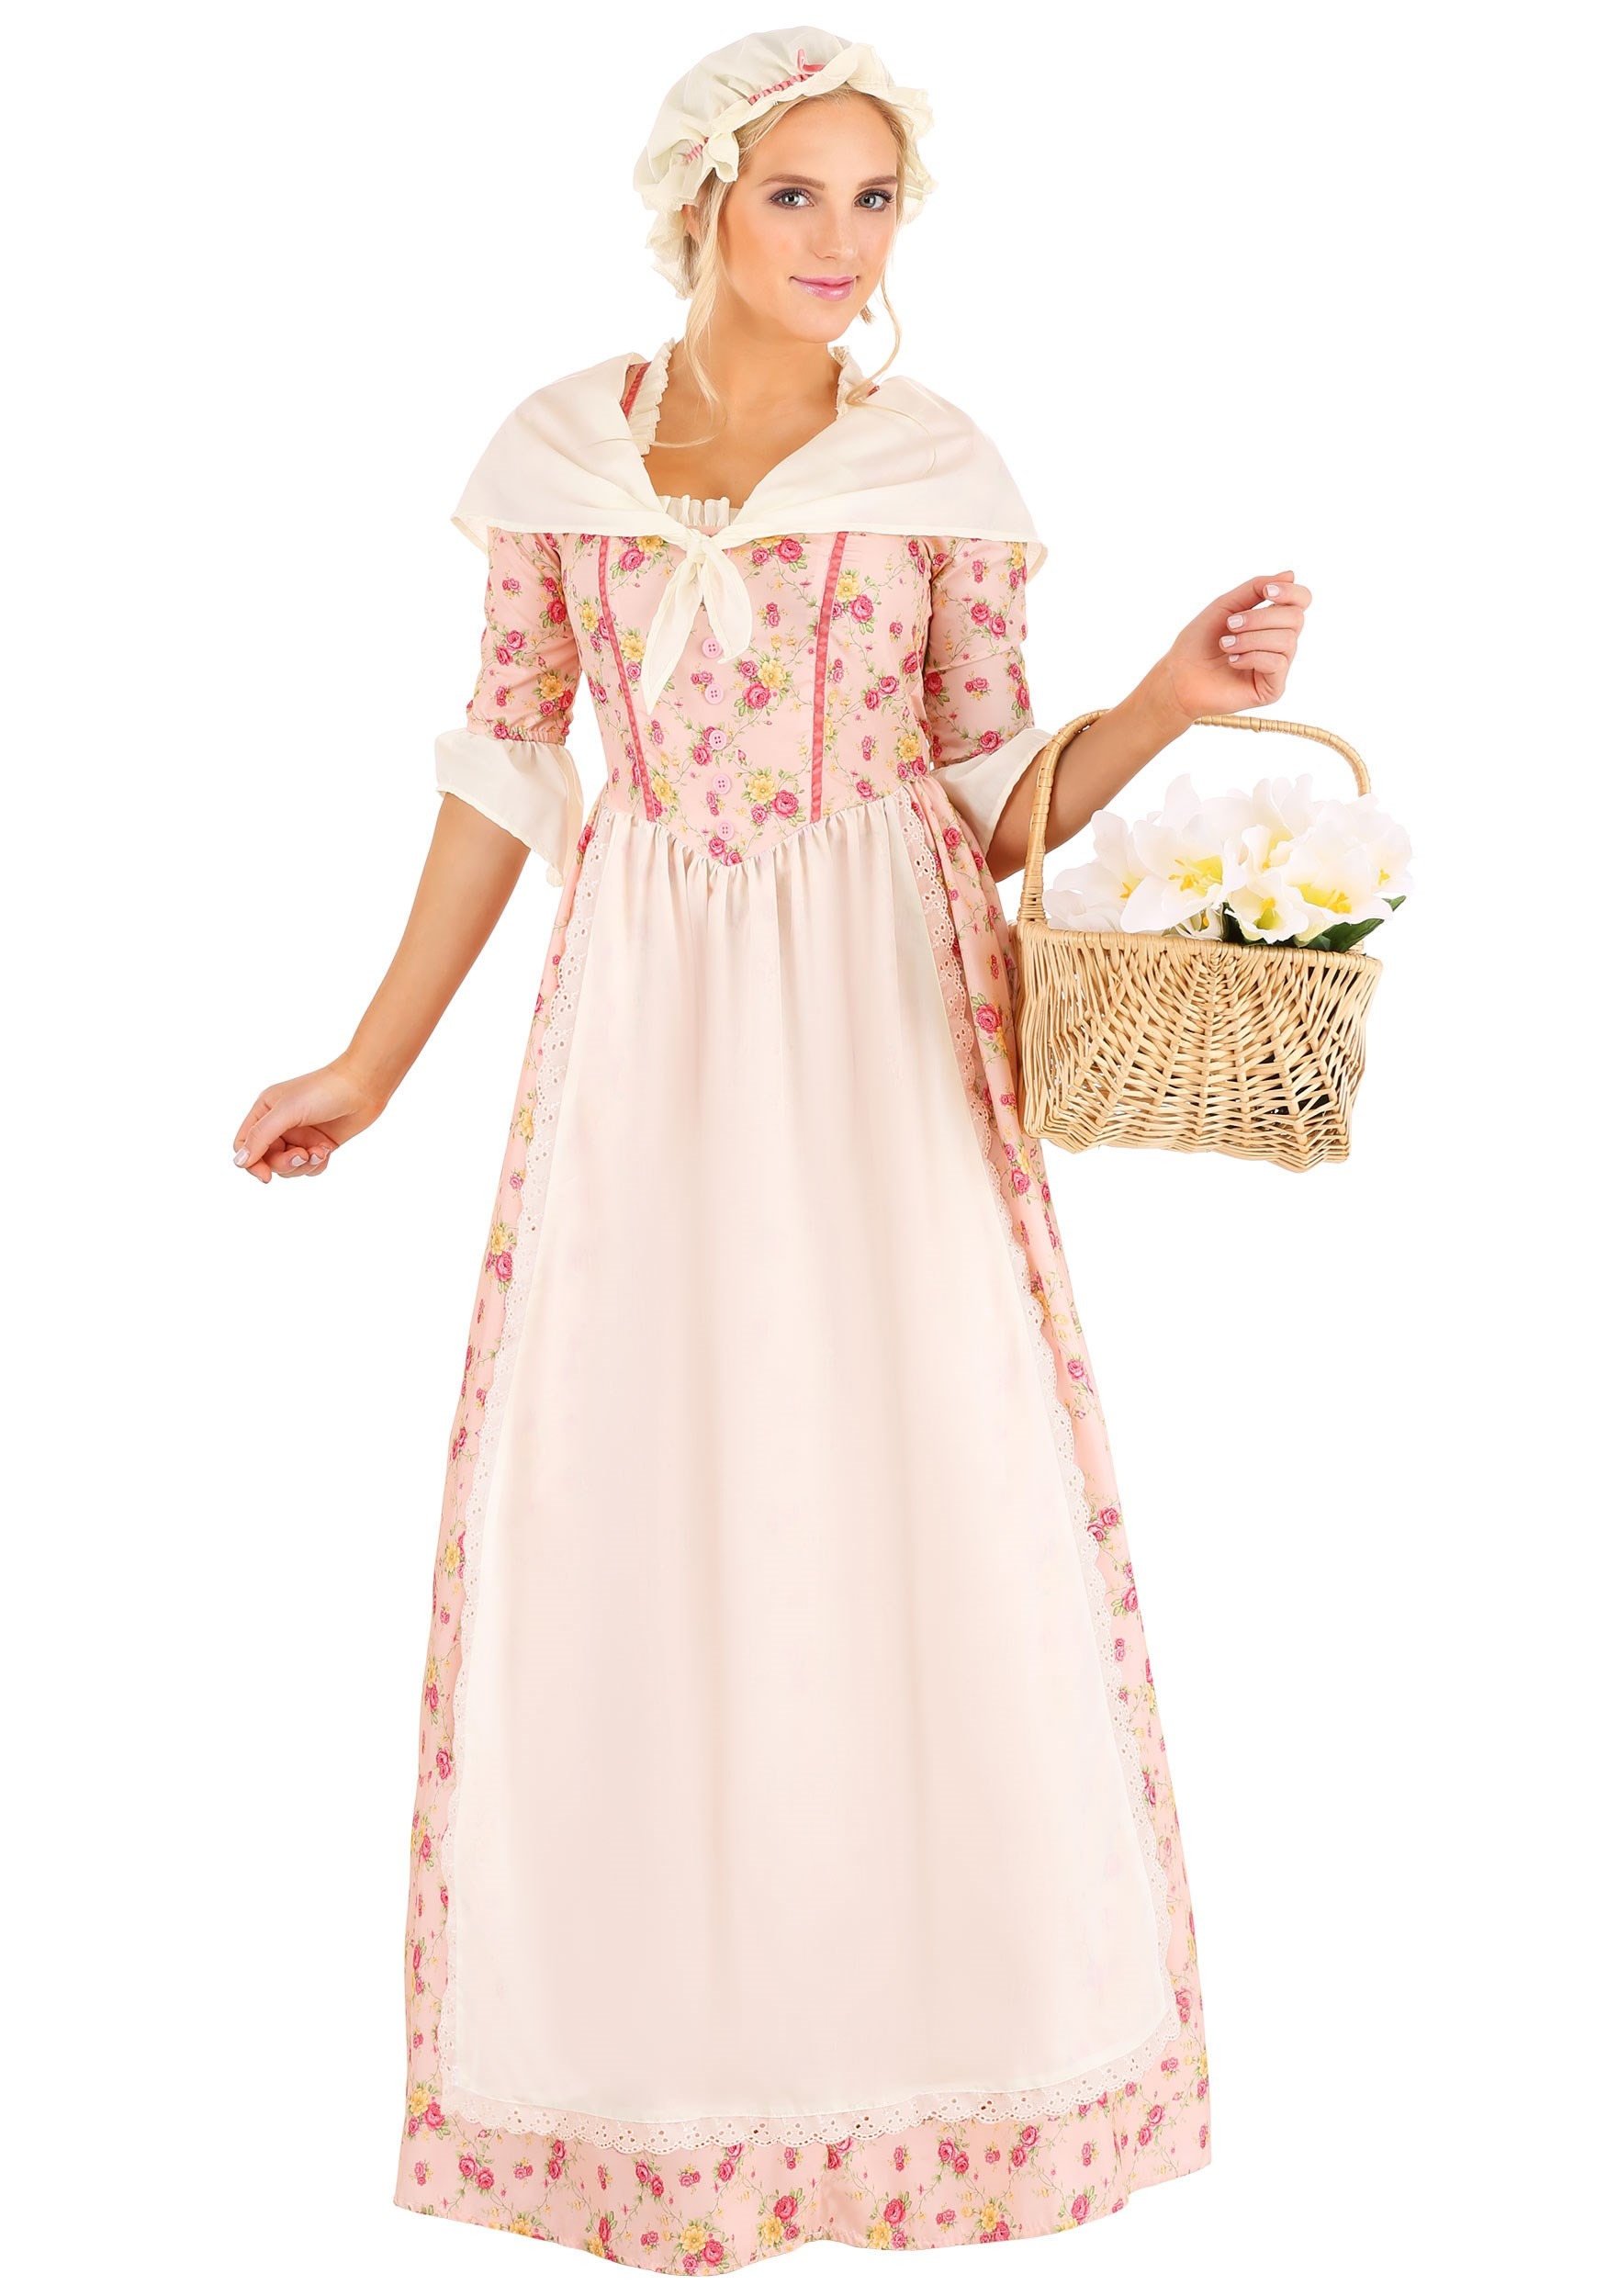 https://images.halloweencostumes.ca/products/64016/1-1/womens-colonial-dress-costume.jpg